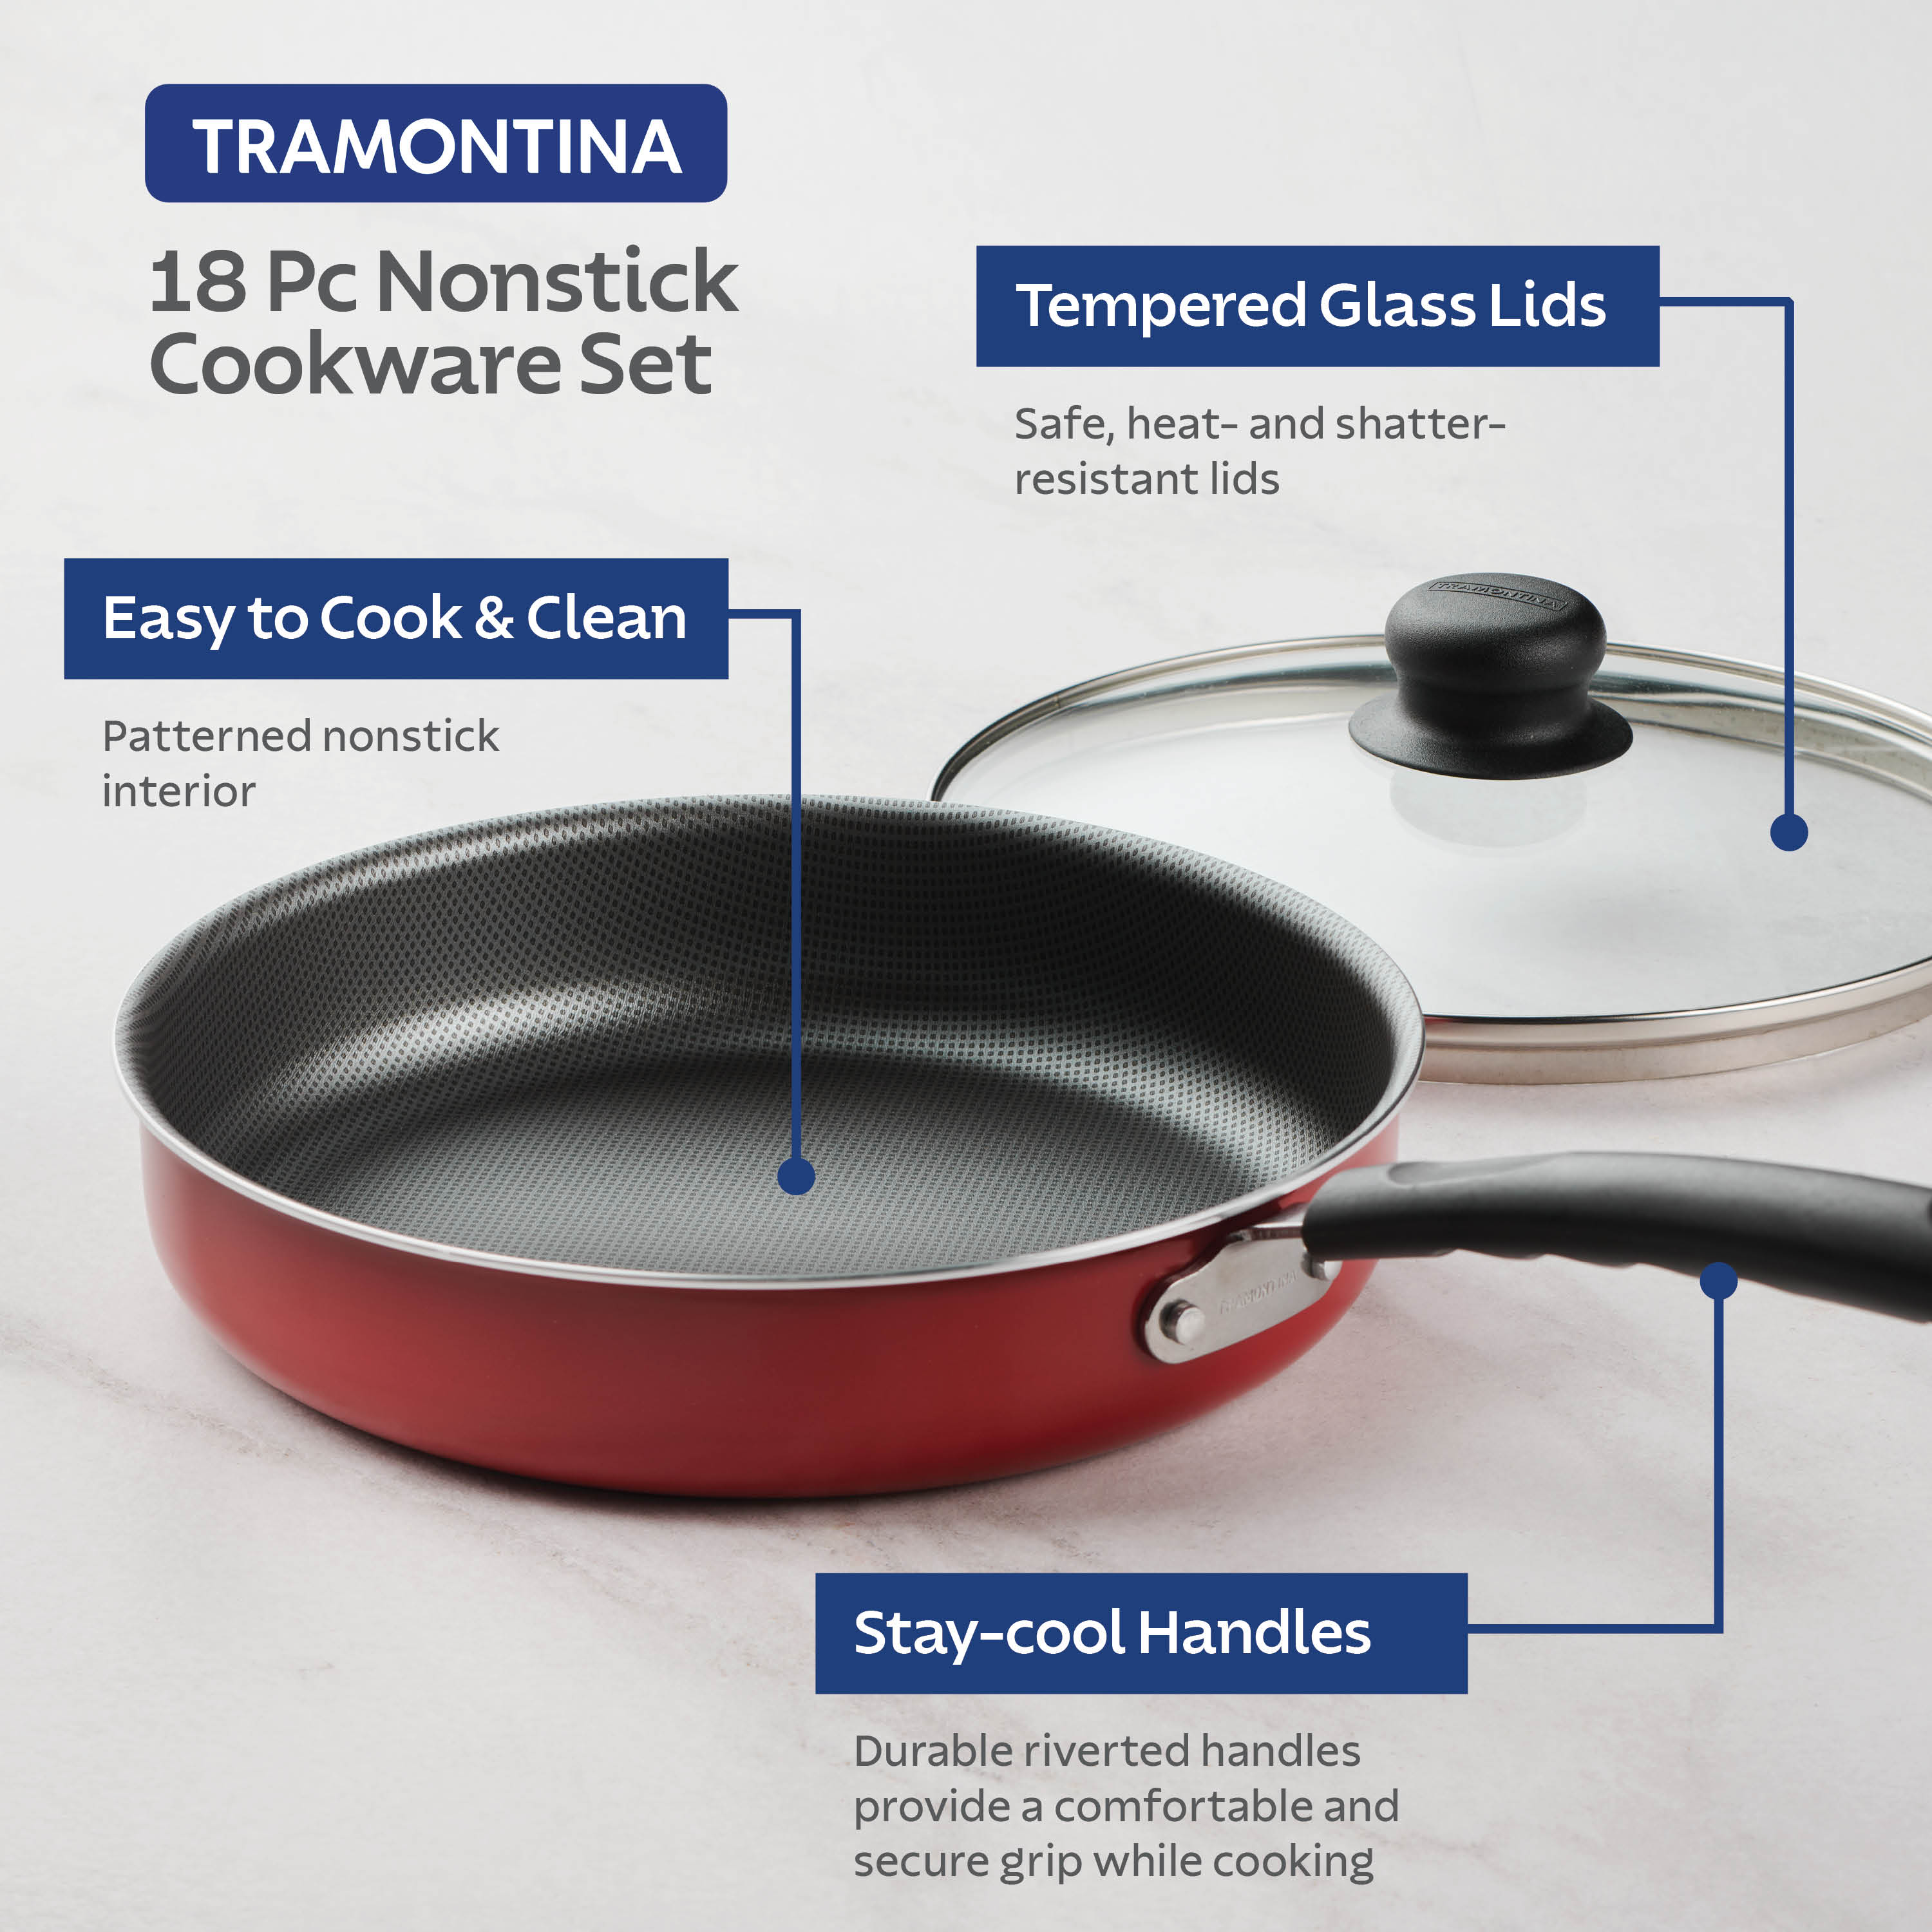 Tramontina Primaware 18 Piece Non-stick Cookware Set, Red - image 11 of 26